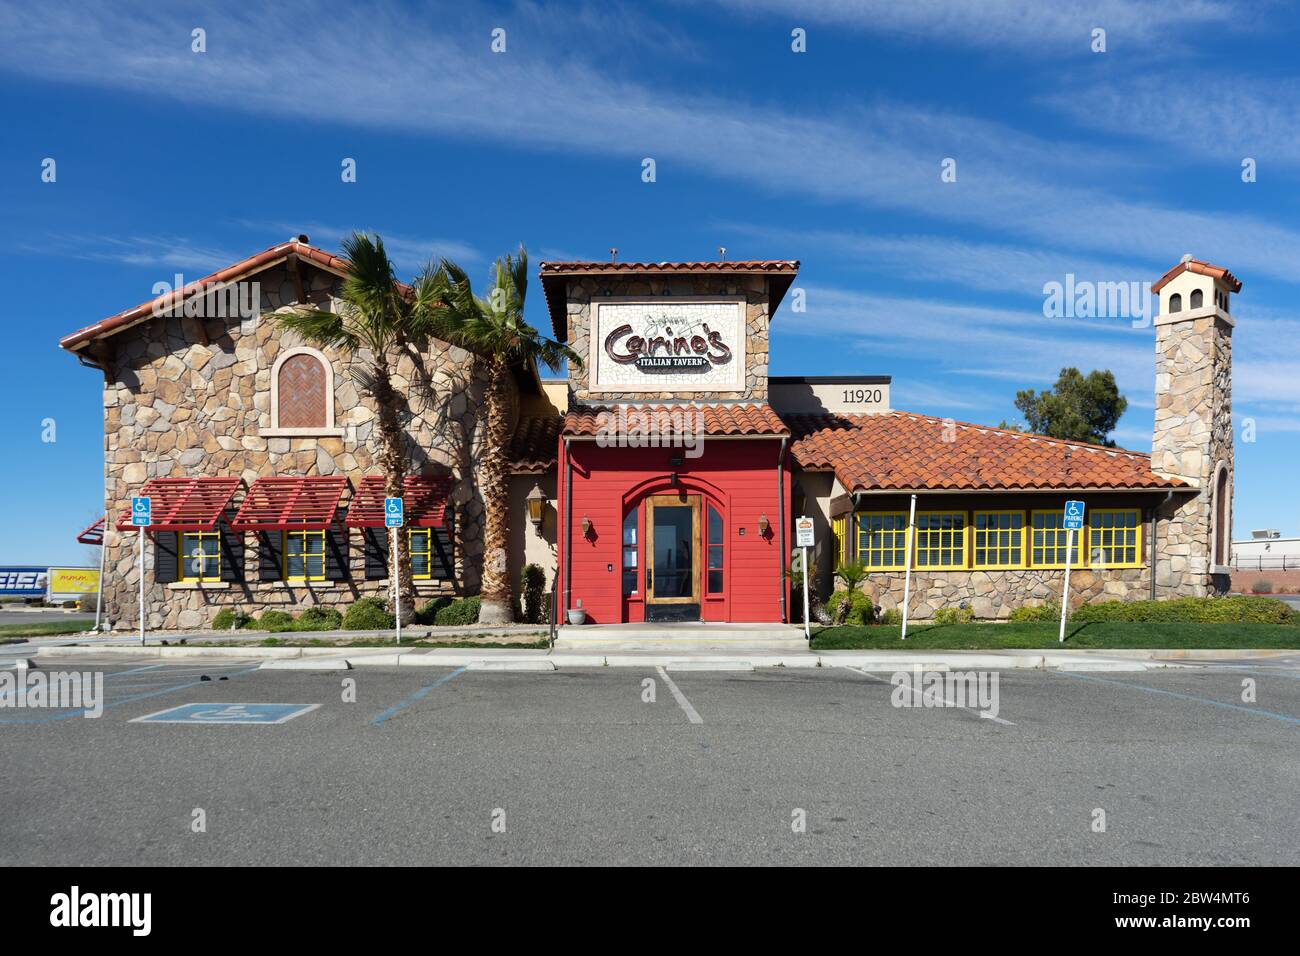 Victorville, CA / USA – February 11, 2020: Johnny Carino’s Italian restaurant exterior building located in Victorville, California, adjacent to Inters Stock Photo